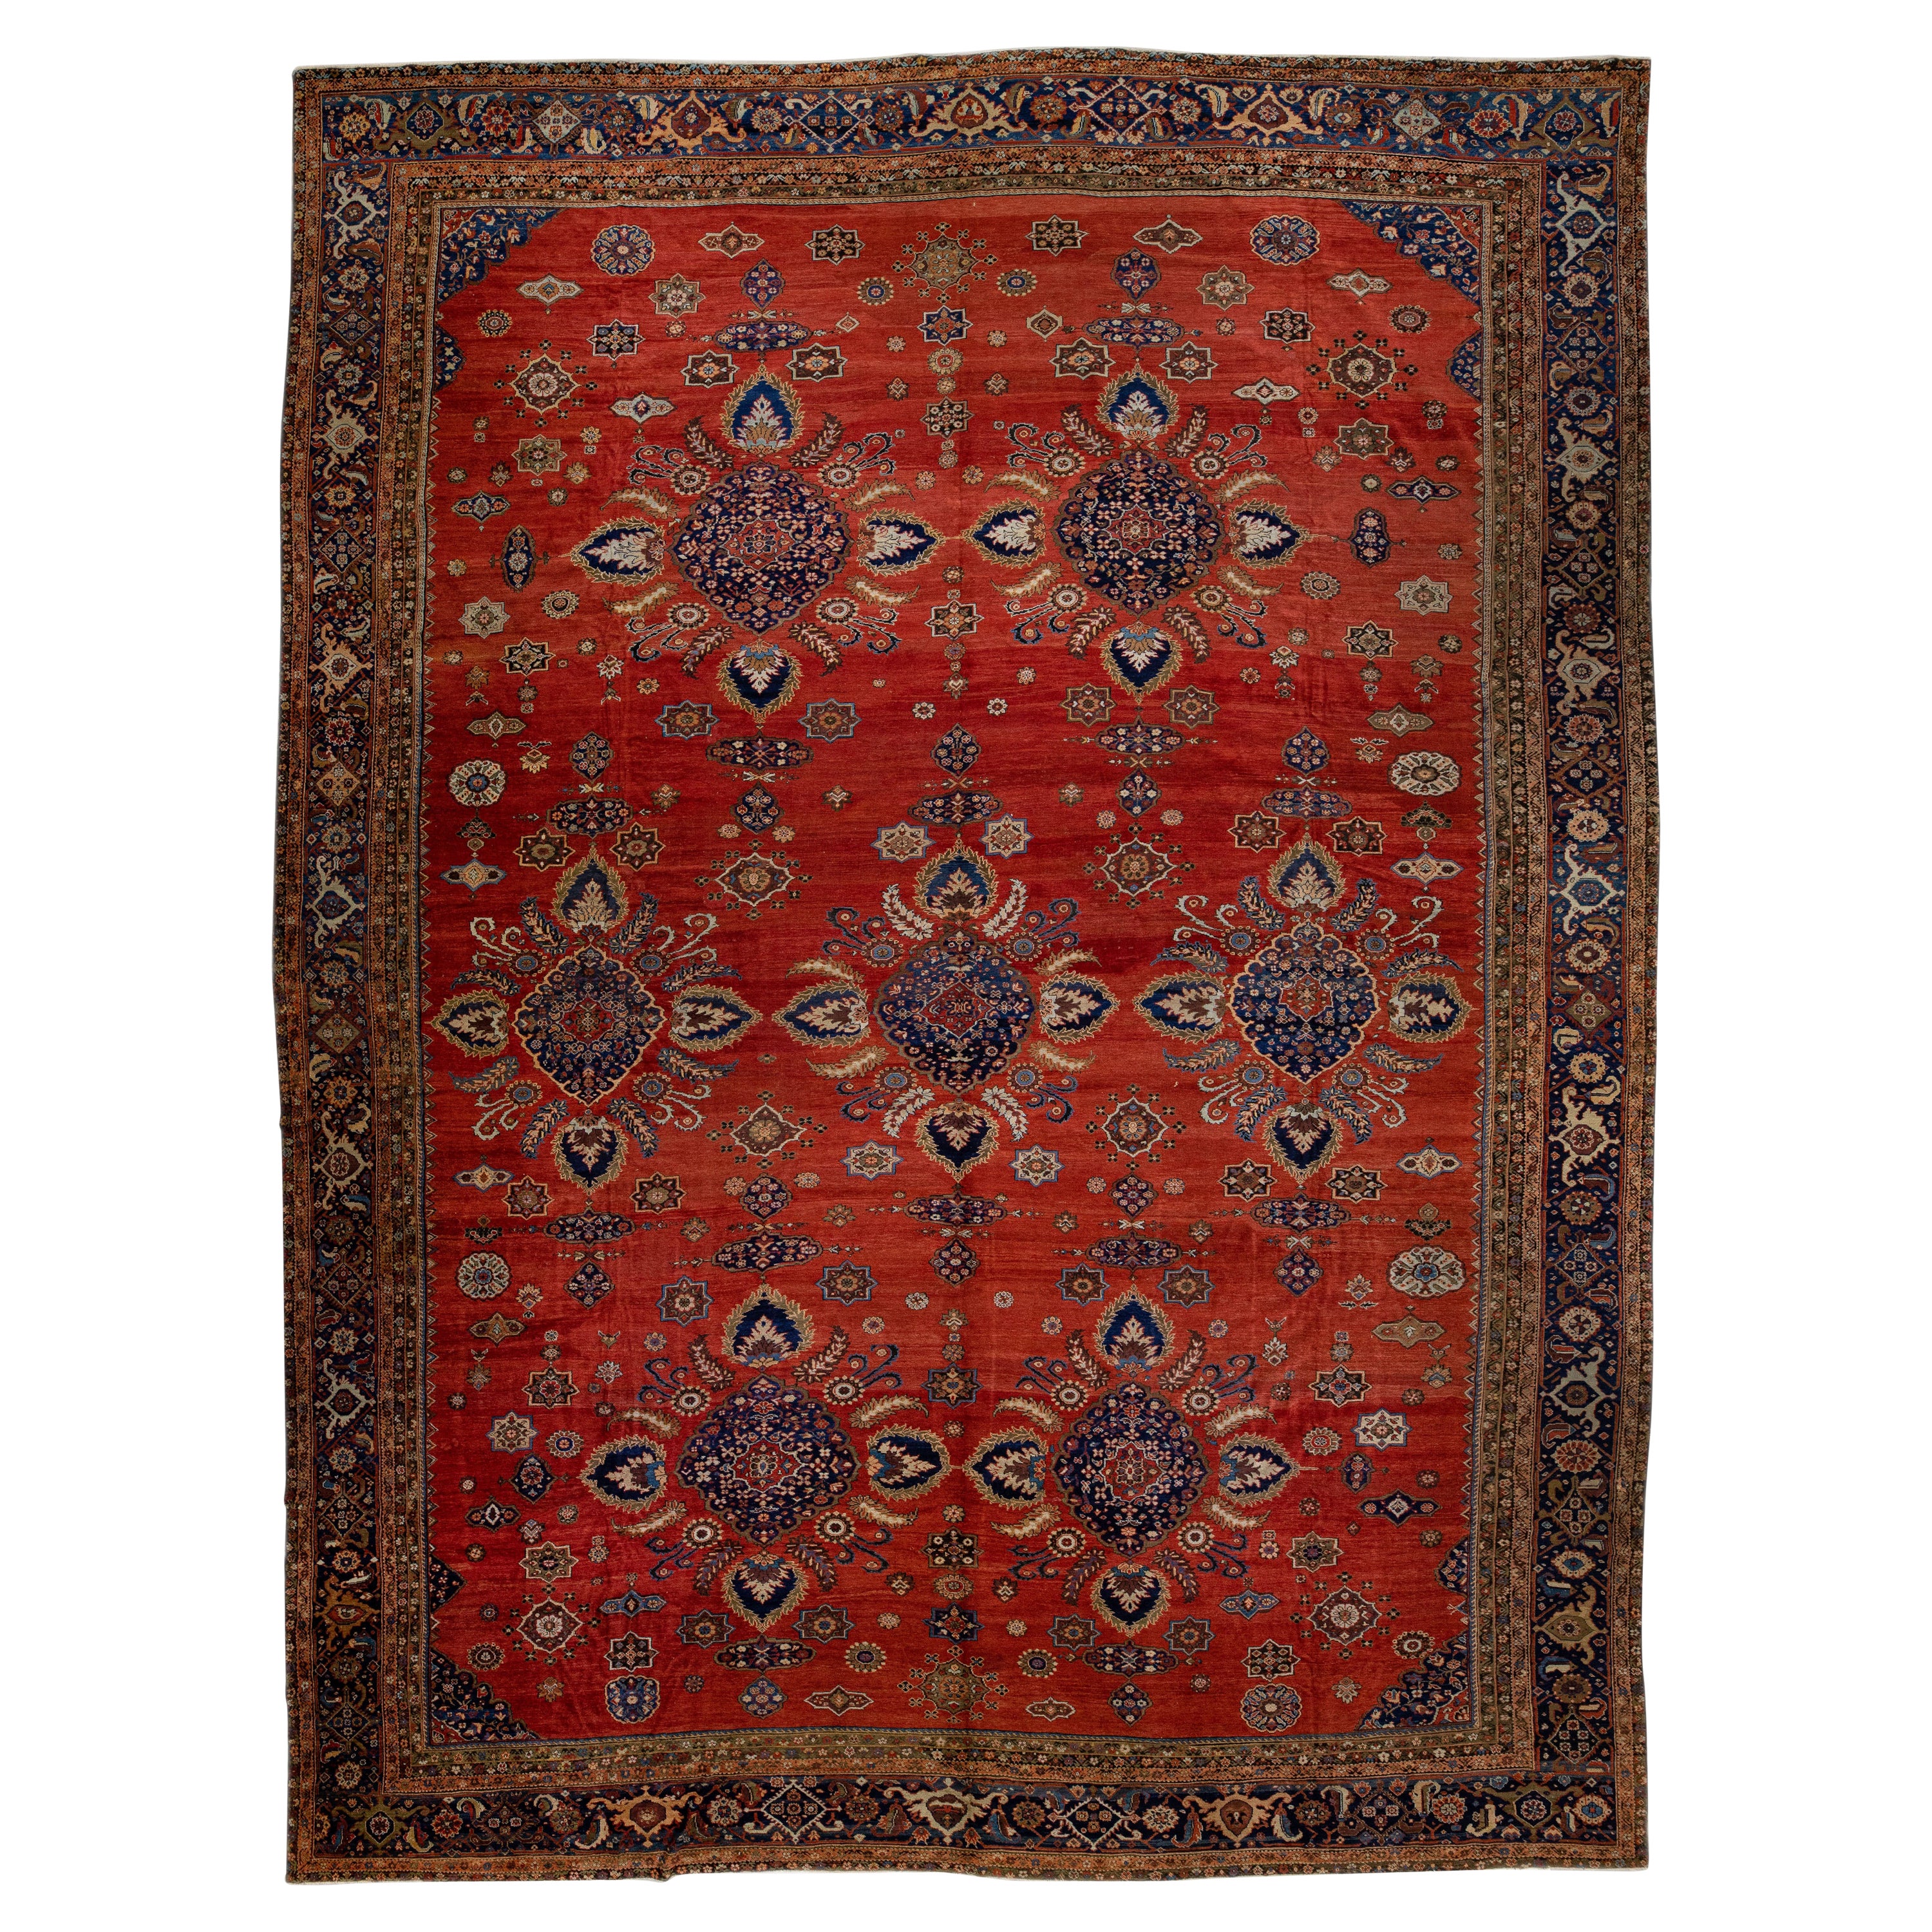 Antique Sultanabad Red Handmade Floral Pattern Persian Wool Rug 